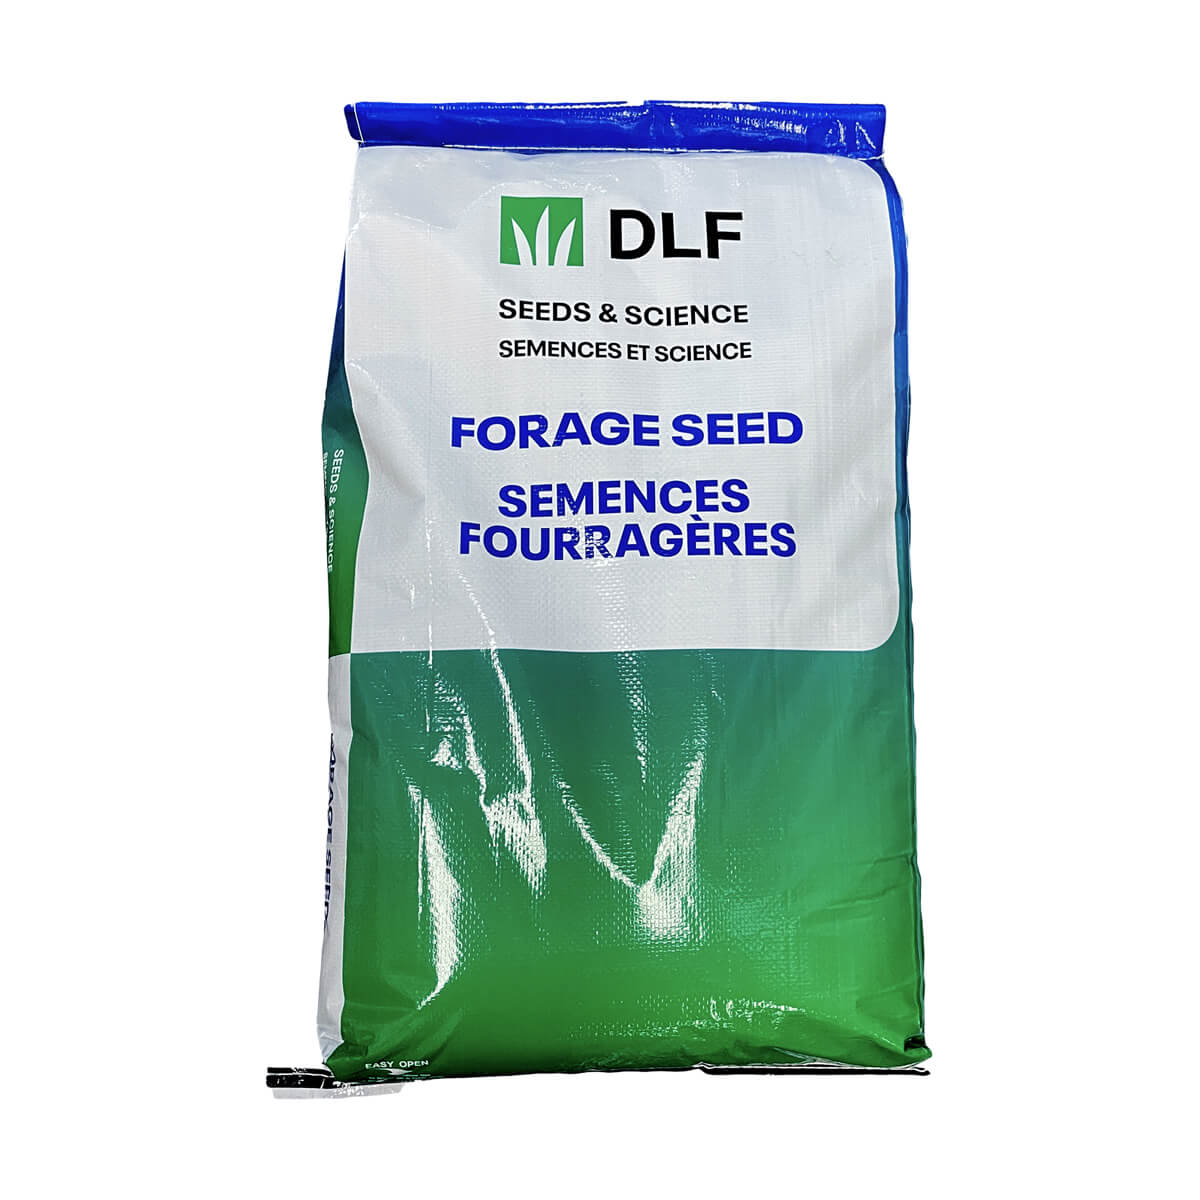 Pickseed Annual ForagePro - 25 kg